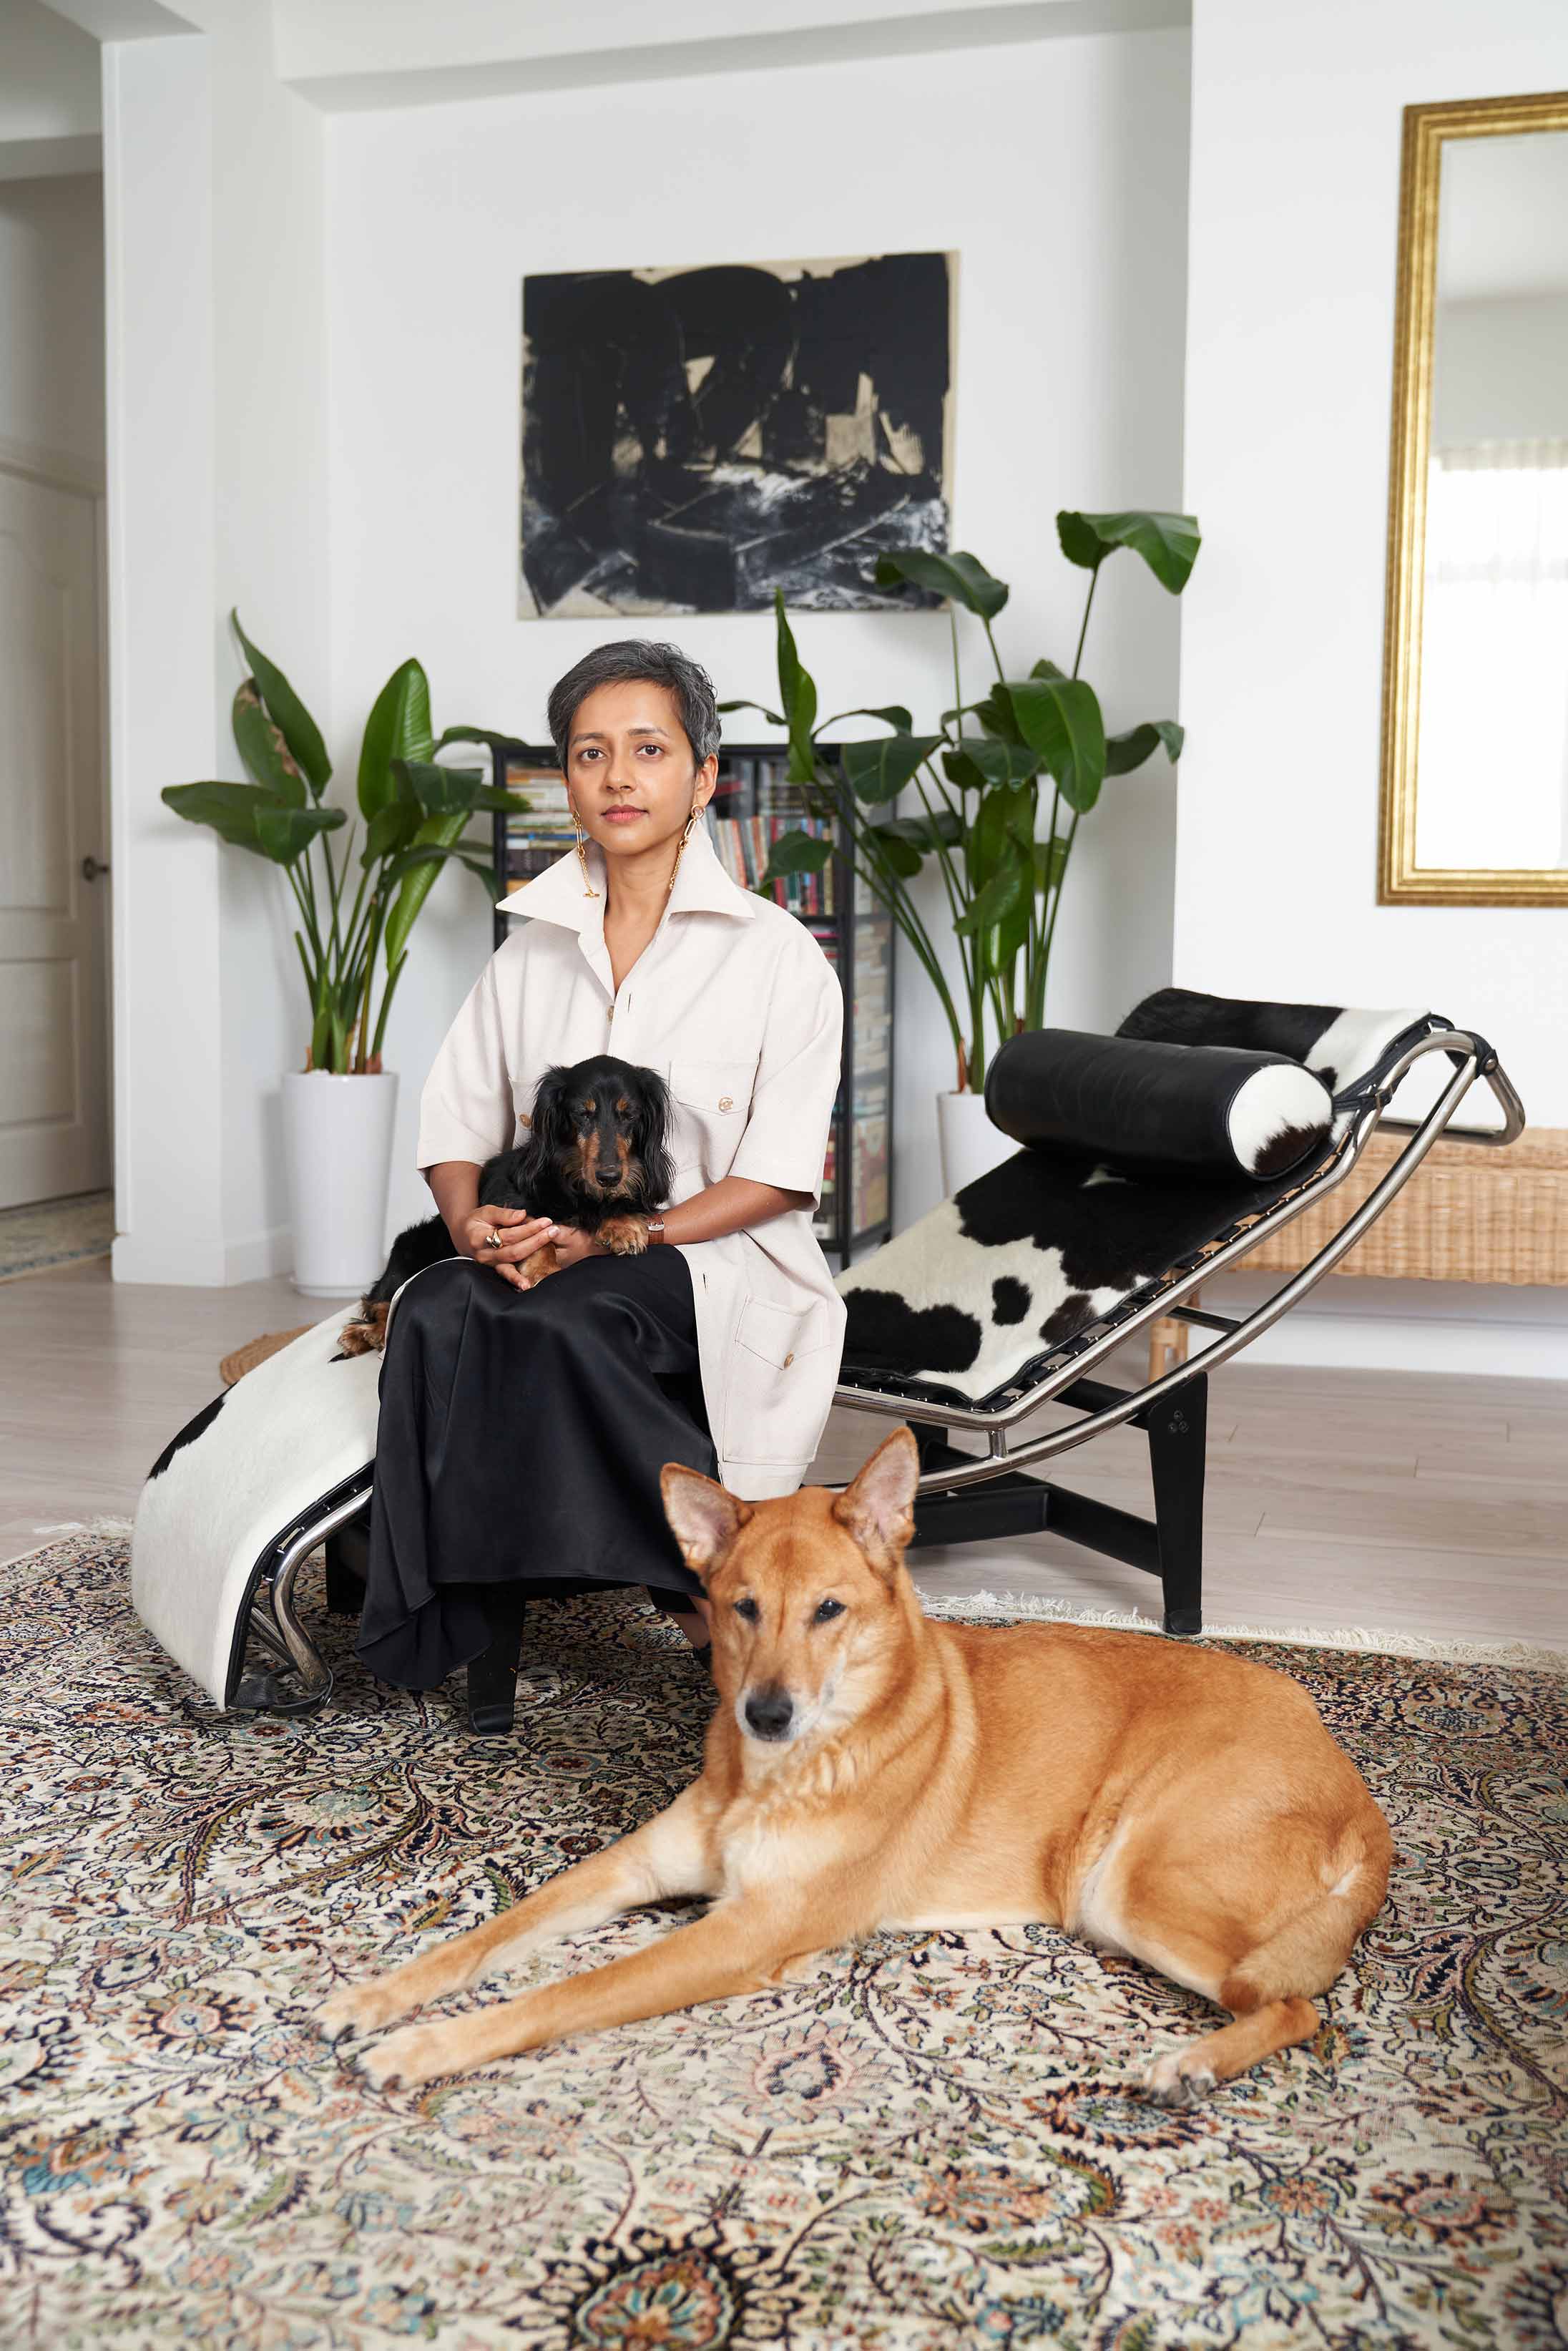 Artist Sai Pradhan in her Hong Kong home with her rescue dogs